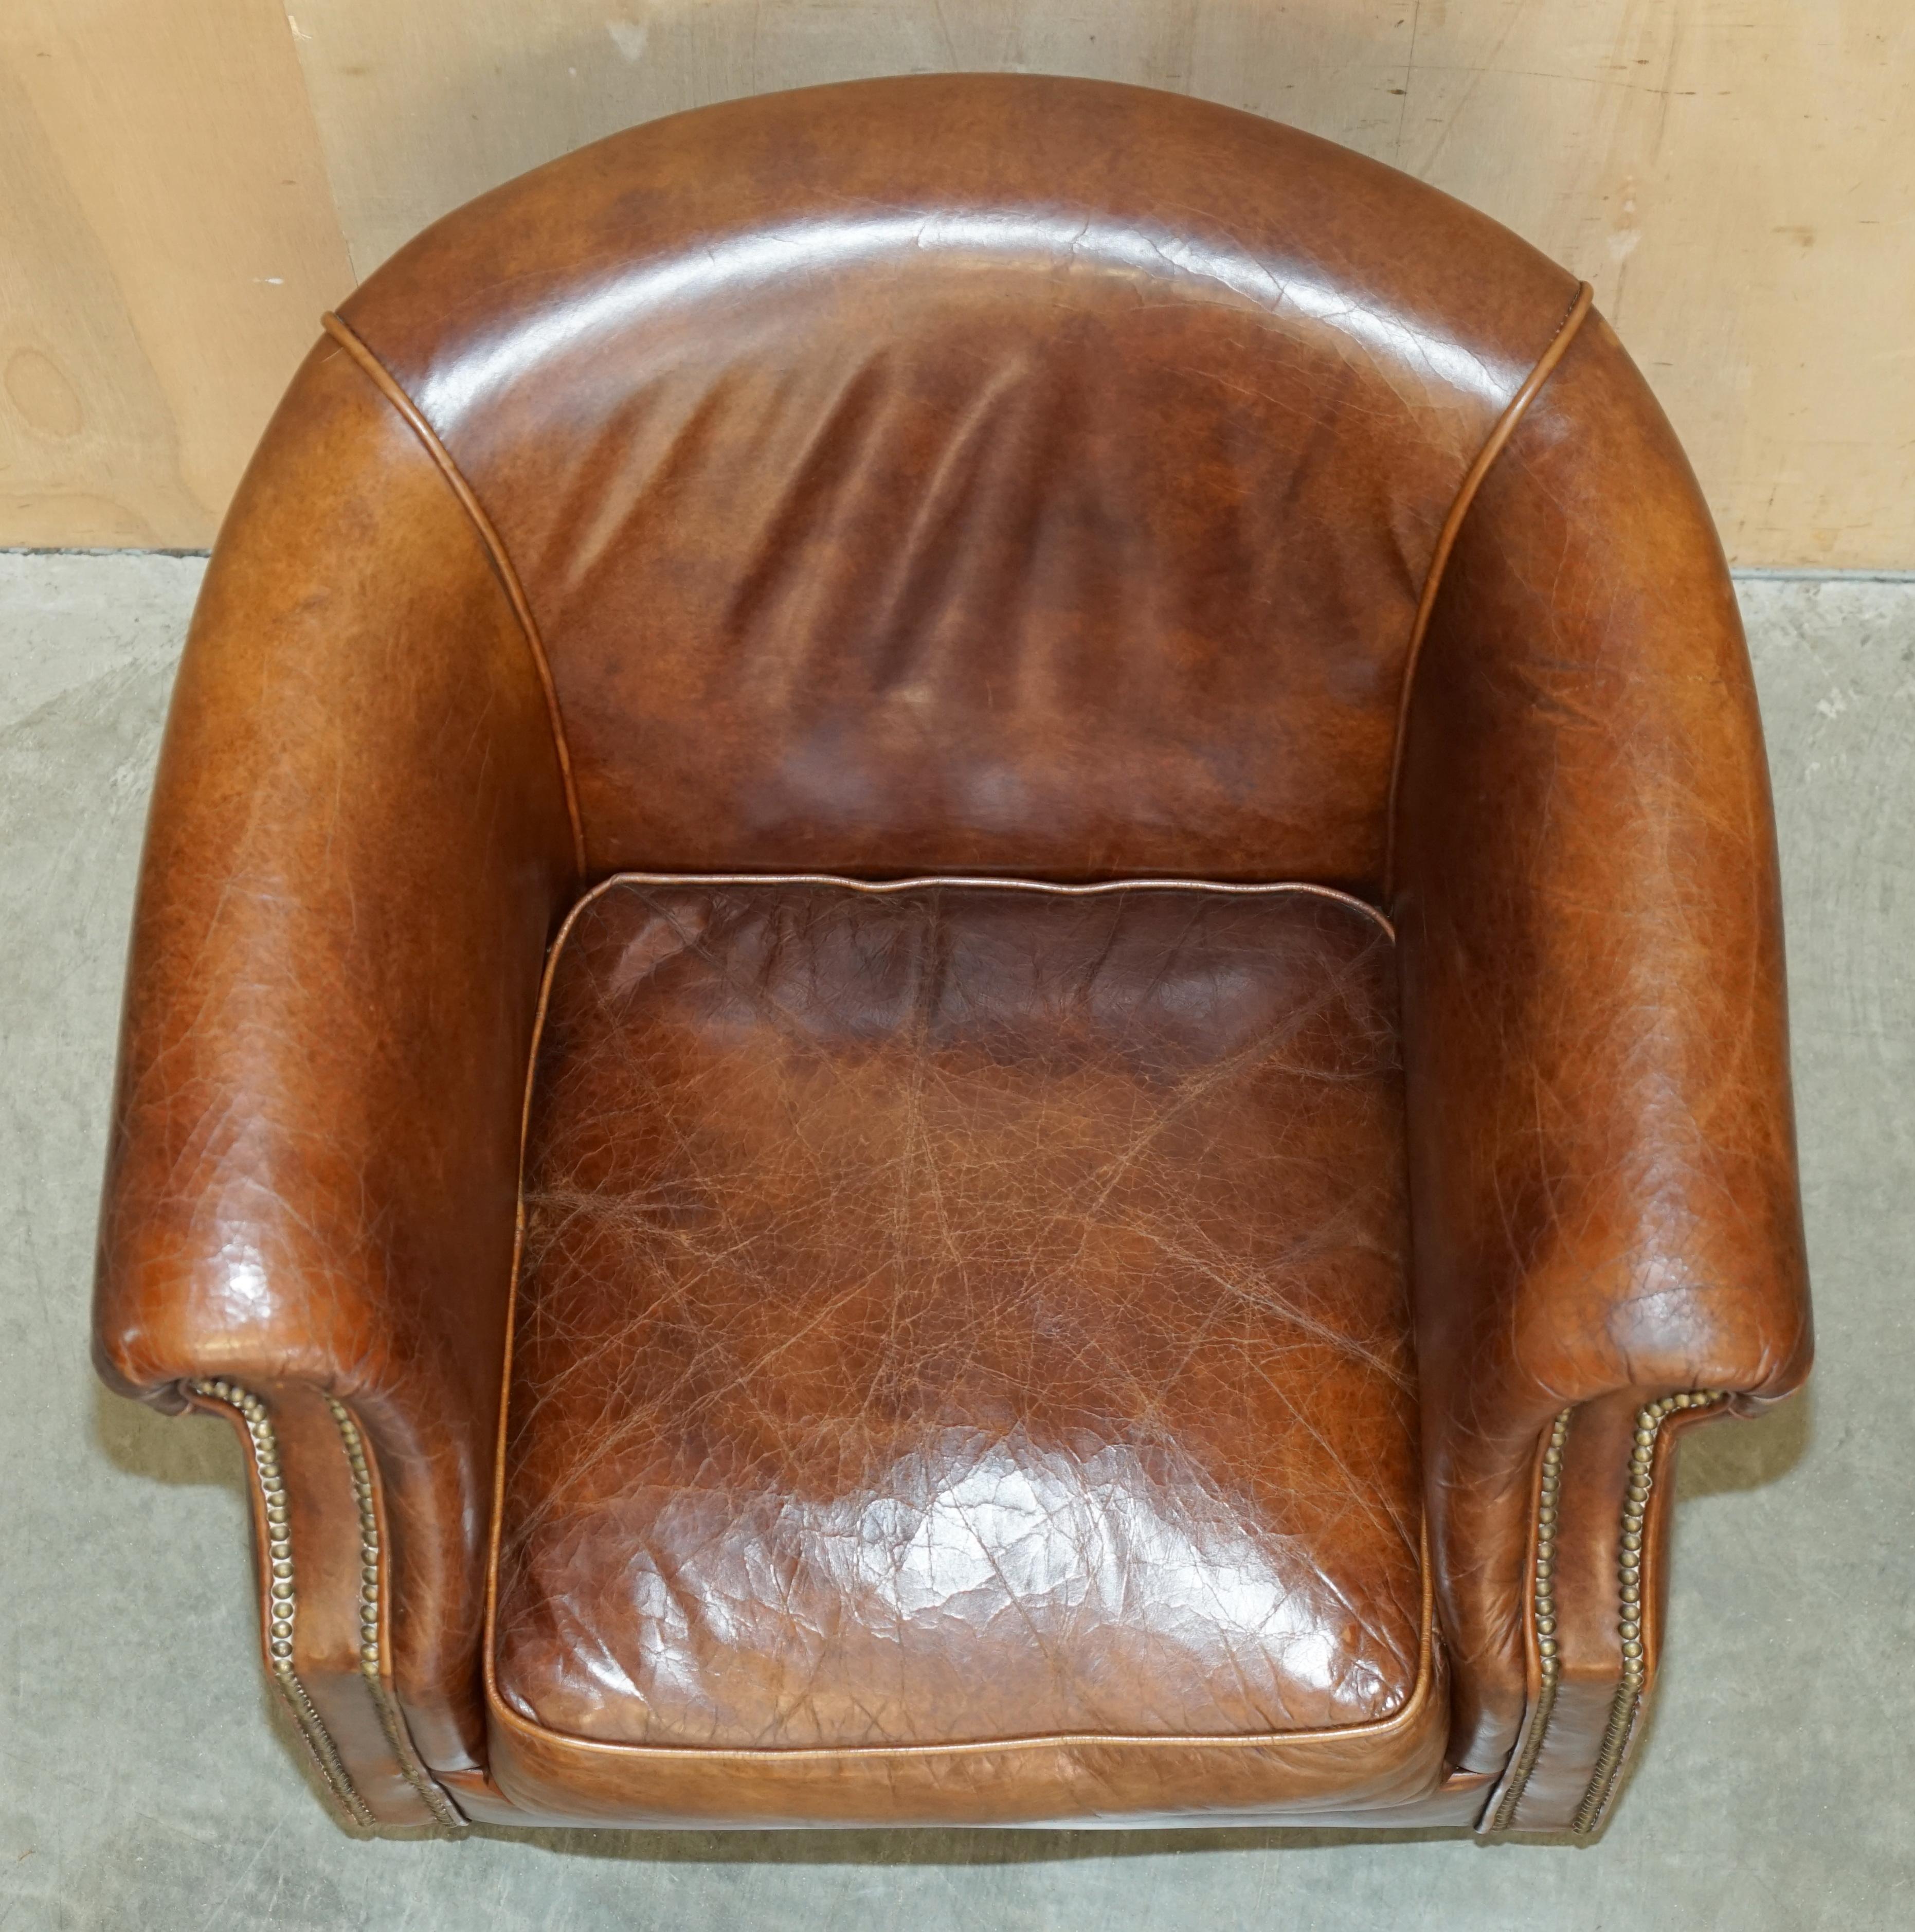 AGED HERiTAGE BROWN LEATHER BIKER TAN CLUB TUB ARMCHAIR MUST SEE LOVELY PATINa!! im Angebot 4